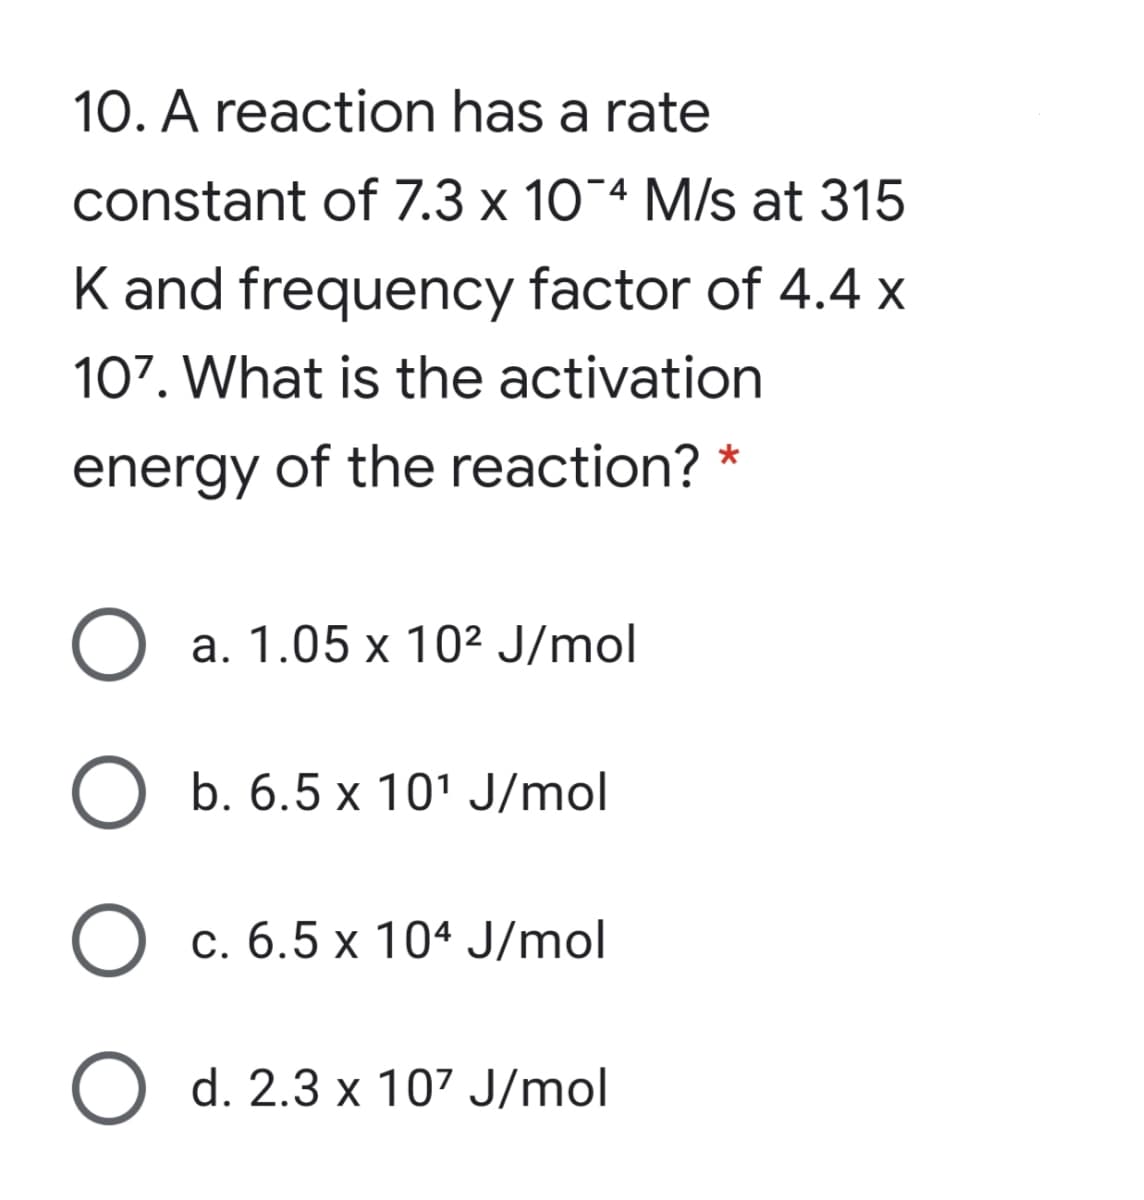 10. A reaction has a rate
constant of 7.3 x 10-4 M/s at 315
K and frequency factor of 4.4 x
107. What is the activation
energy of the reaction? *
a. 1.05 x 10² J/mol
O b. 6.5 x 101 J/mol
O c. 6.5 x 104 J/mol
O d. 2.3 x 107 J/mol
